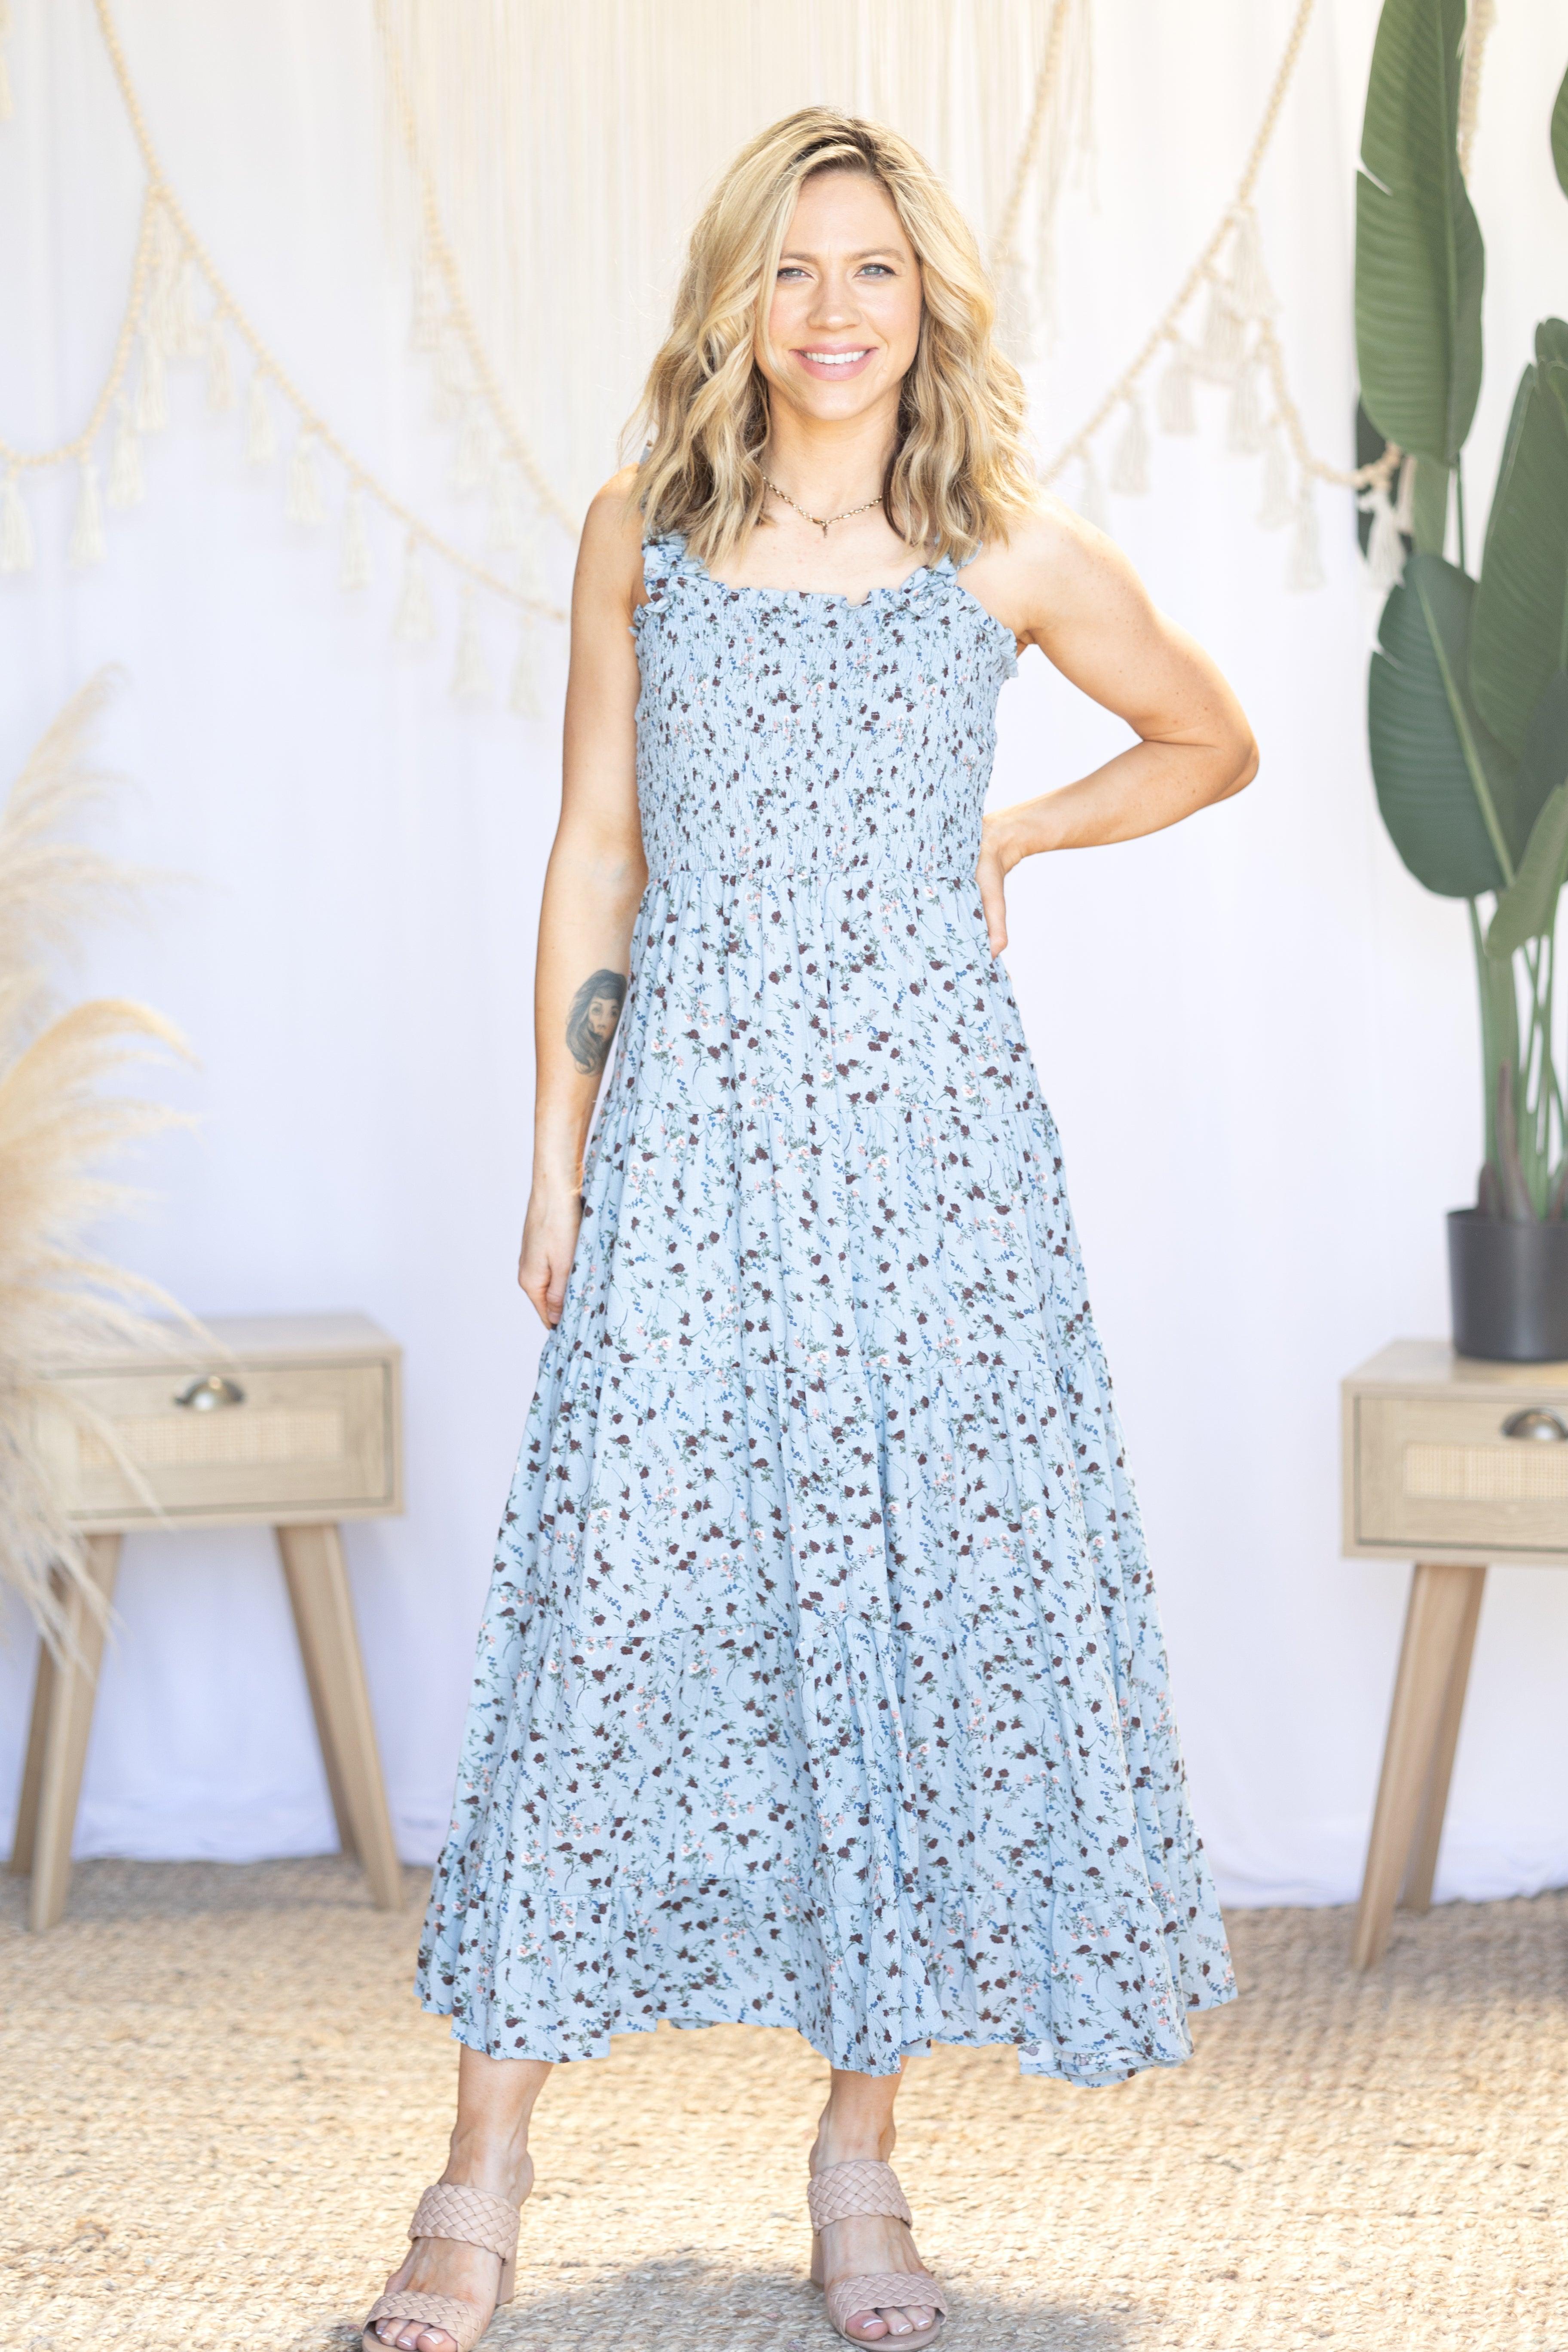 Brunch Date - Maxi Giftmas Boutique Simplified   